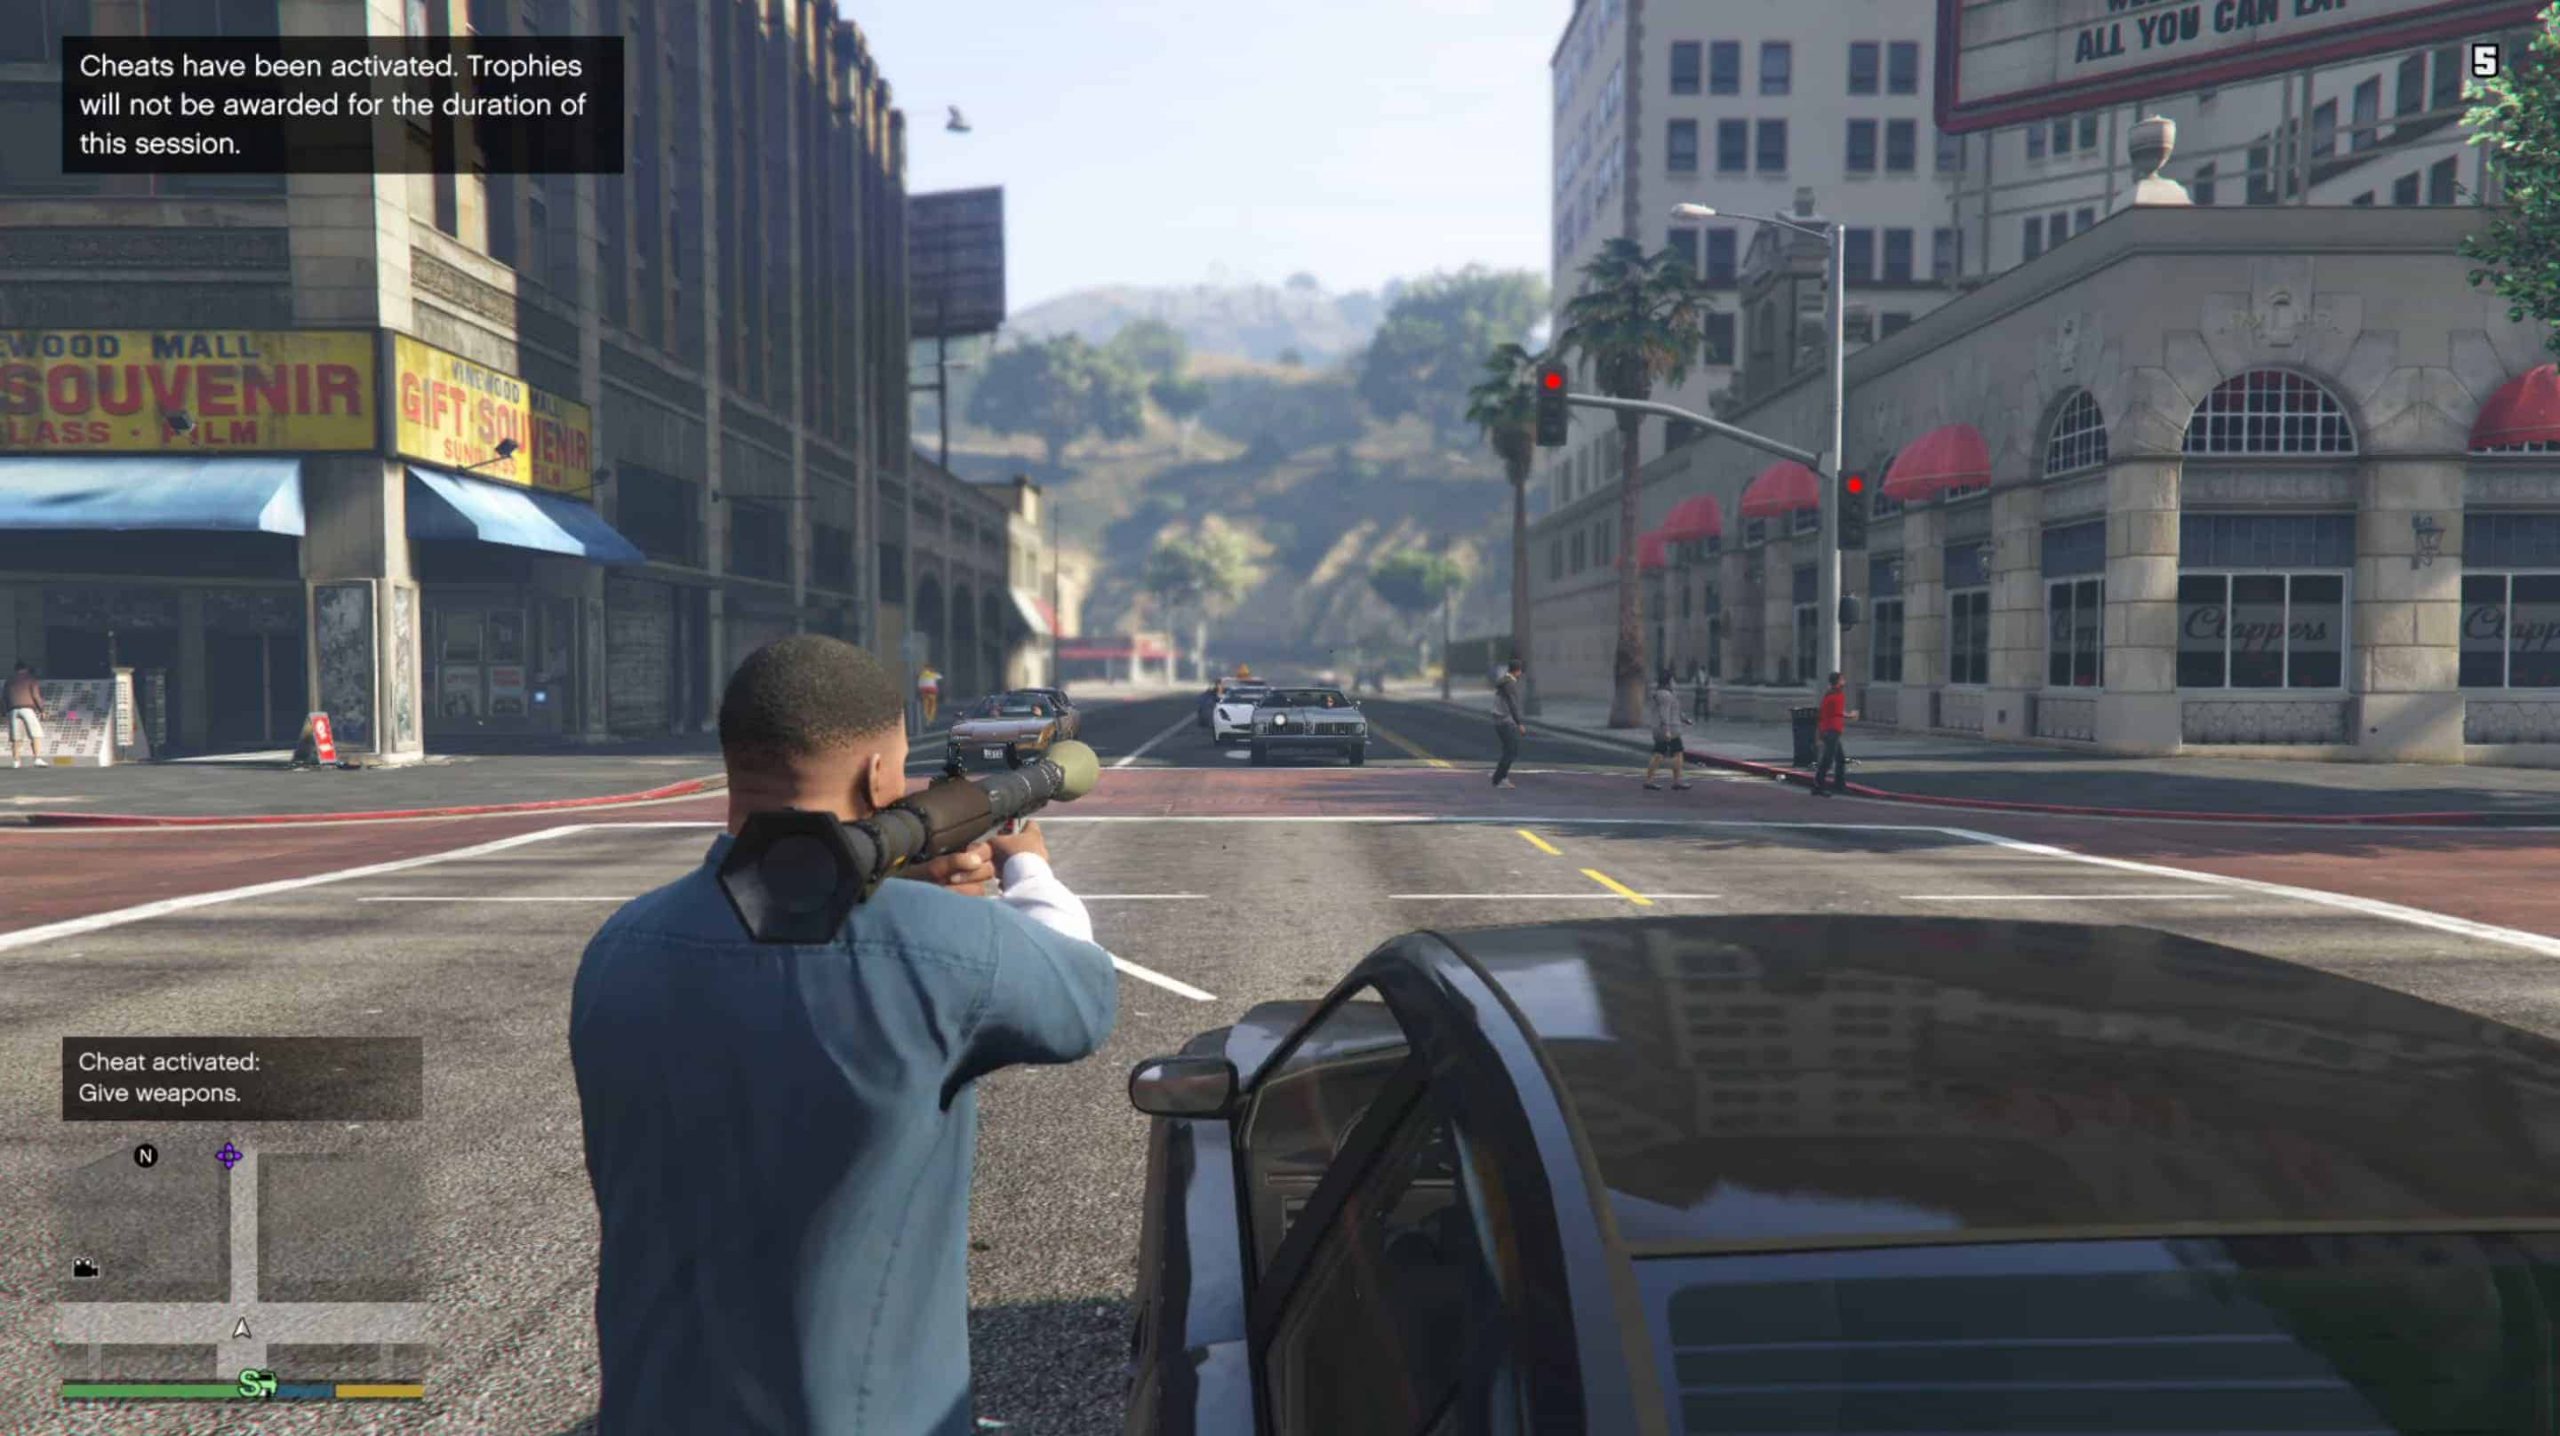 GTA V Cheat codes And The Latest Update